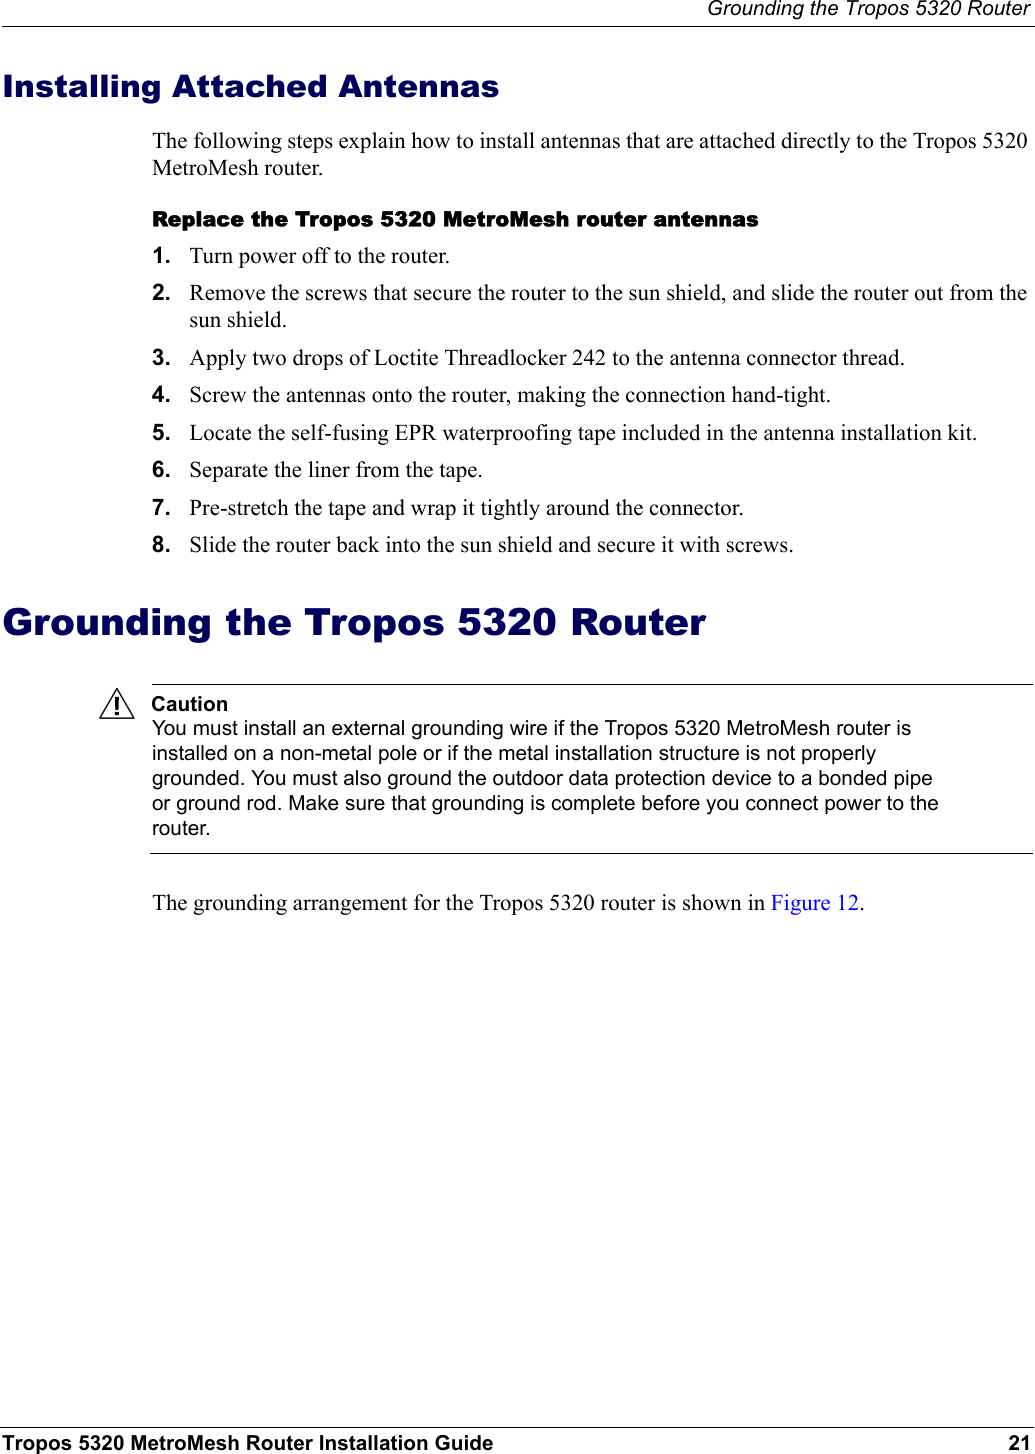 Grounding the Tropos 5320 RouterTropos 5320 MetroMesh Router Installation Guide 21Installing Attached AntennasThe following steps explain how to install antennas that are attached directly to the Tropos 5320 MetroMesh router. Replace the Tropos 5320 MetroMesh router antennas1. Turn power off to the router.2. Remove the screws that secure the router to the sun shield, and slide the router out from the sun shield.3. Apply two drops of Loctite Threadlocker 242 to the antenna connector thread.4. Screw the antennas onto the router, making the connection hand-tight.5. Locate the self-fusing EPR waterproofing tape included in the antenna installation kit.6. Separate the liner from the tape.7. Pre-stretch the tape and wrap it tightly around the connector.8. Slide the router back into the sun shield and secure it with screws.Grounding the Tropos 5320 RouterCautionYou must install an external grounding wire if the Tropos 5320 MetroMesh router is installed on a non-metal pole or if the metal installation structure is not properly grounded. You must also ground the outdoor data protection device to a bonded pipe or ground rod. Make sure that grounding is complete before you connect power to the router.The grounding arrangement for the Tropos 5320 router is shown in Figure 12.